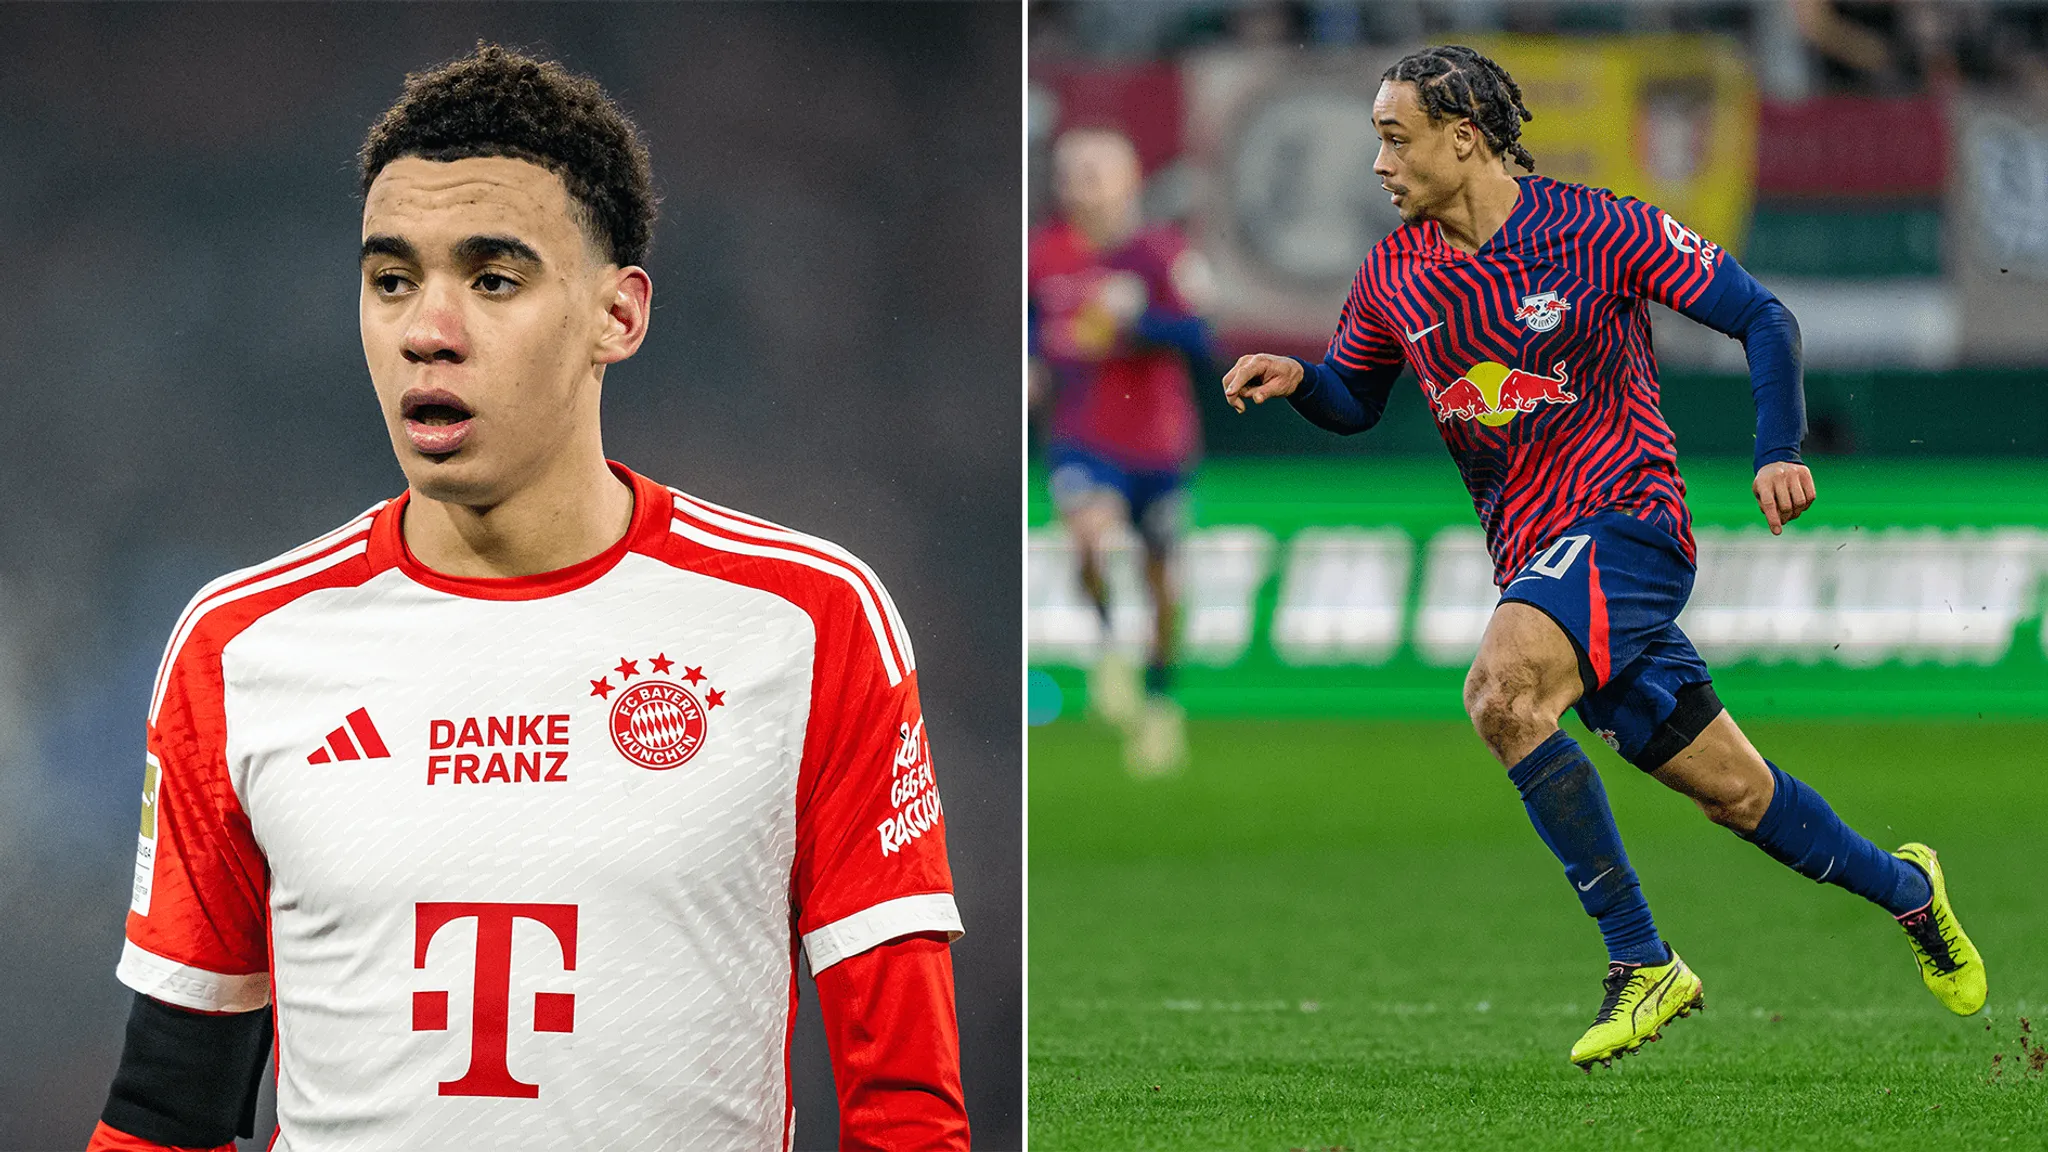 Germany vs. The Netherlands, Jamal Musiala vs. Xavi: The talented youngsters face off.